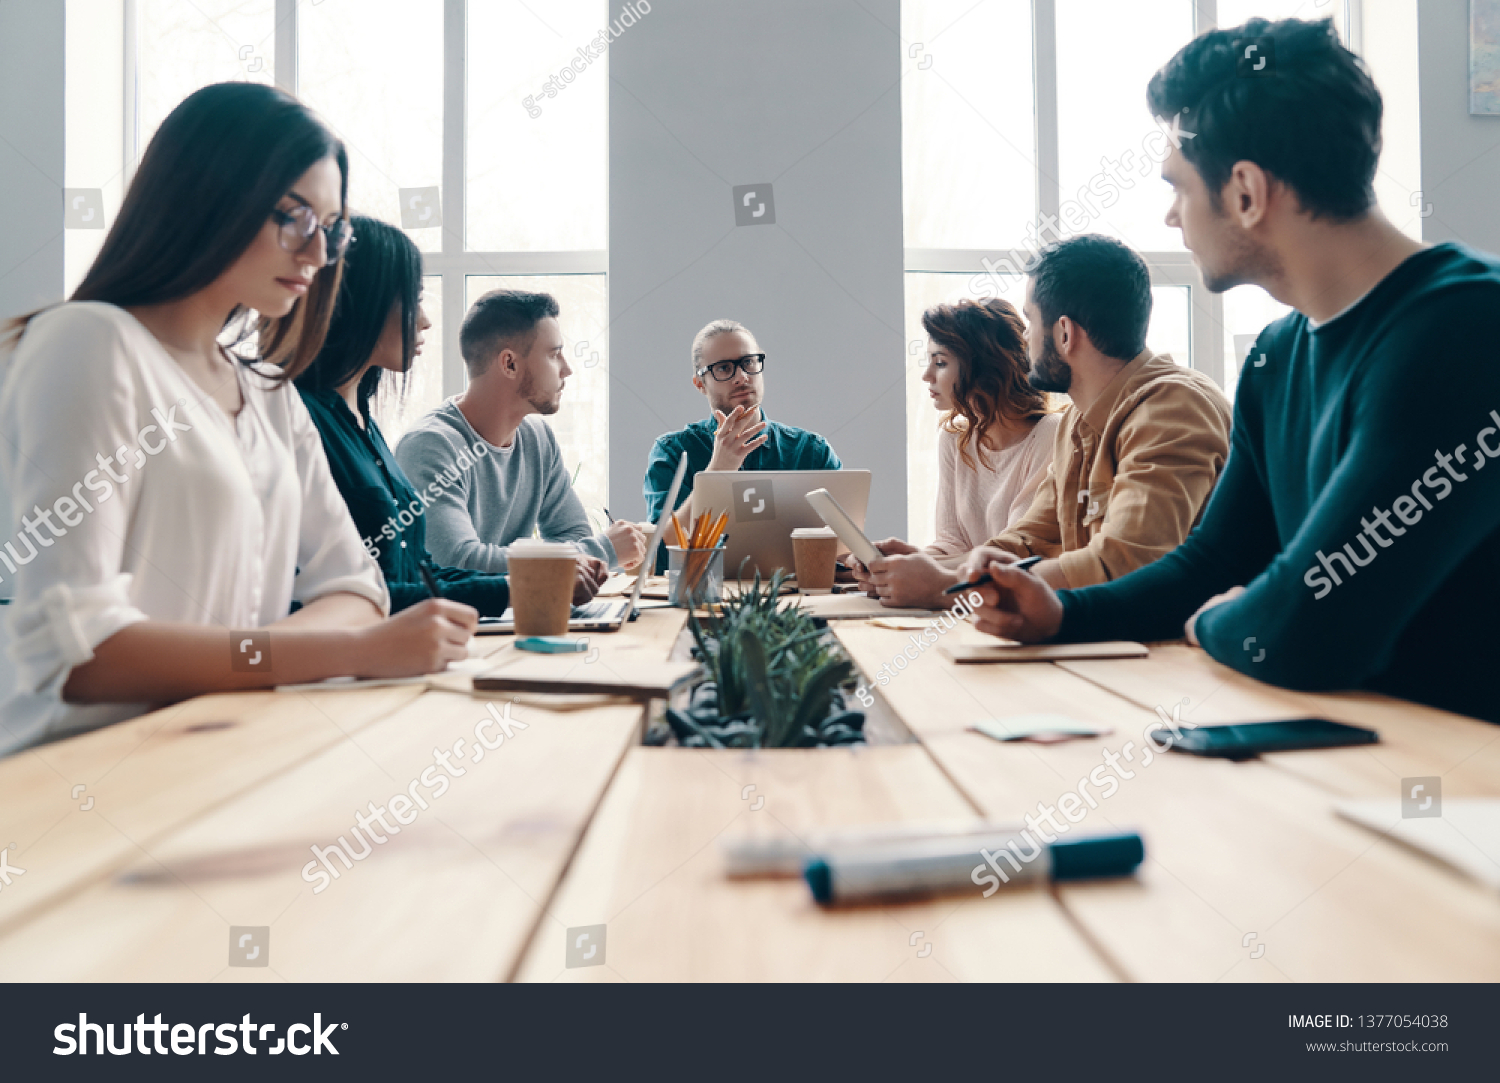 Staff meeting. Group of young modern people in smart casual wear discussing something while working in the creative office           #1377054038